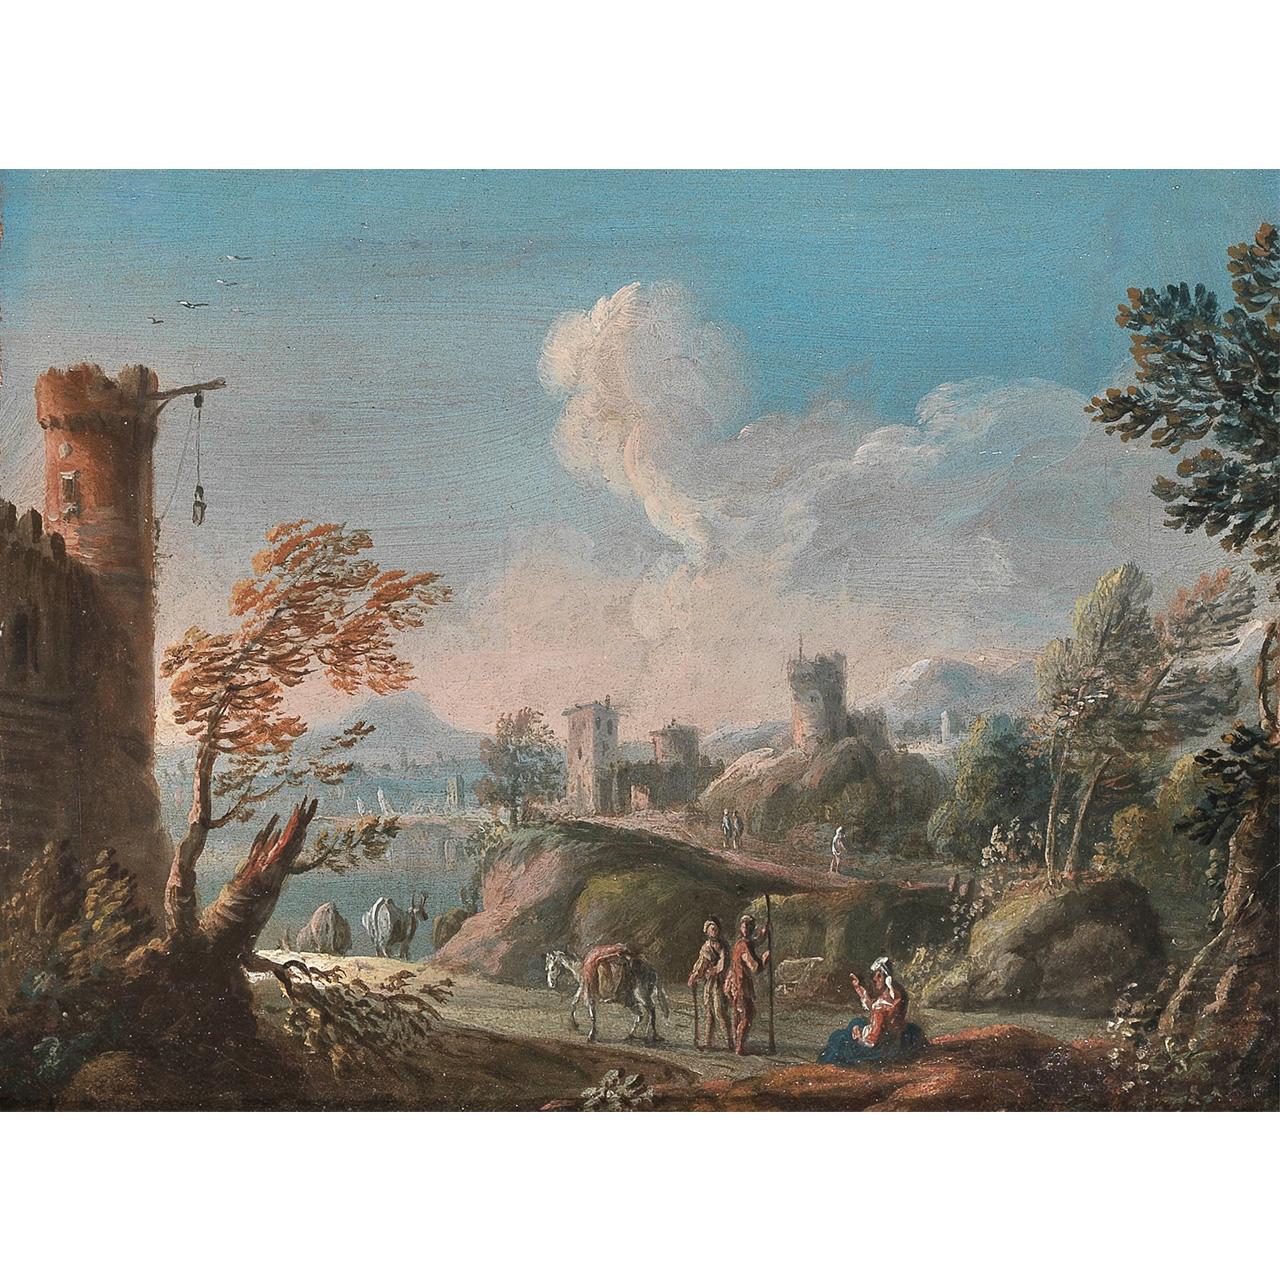 Dipinto: View of the Roman Countryside with figures and buildings (I)